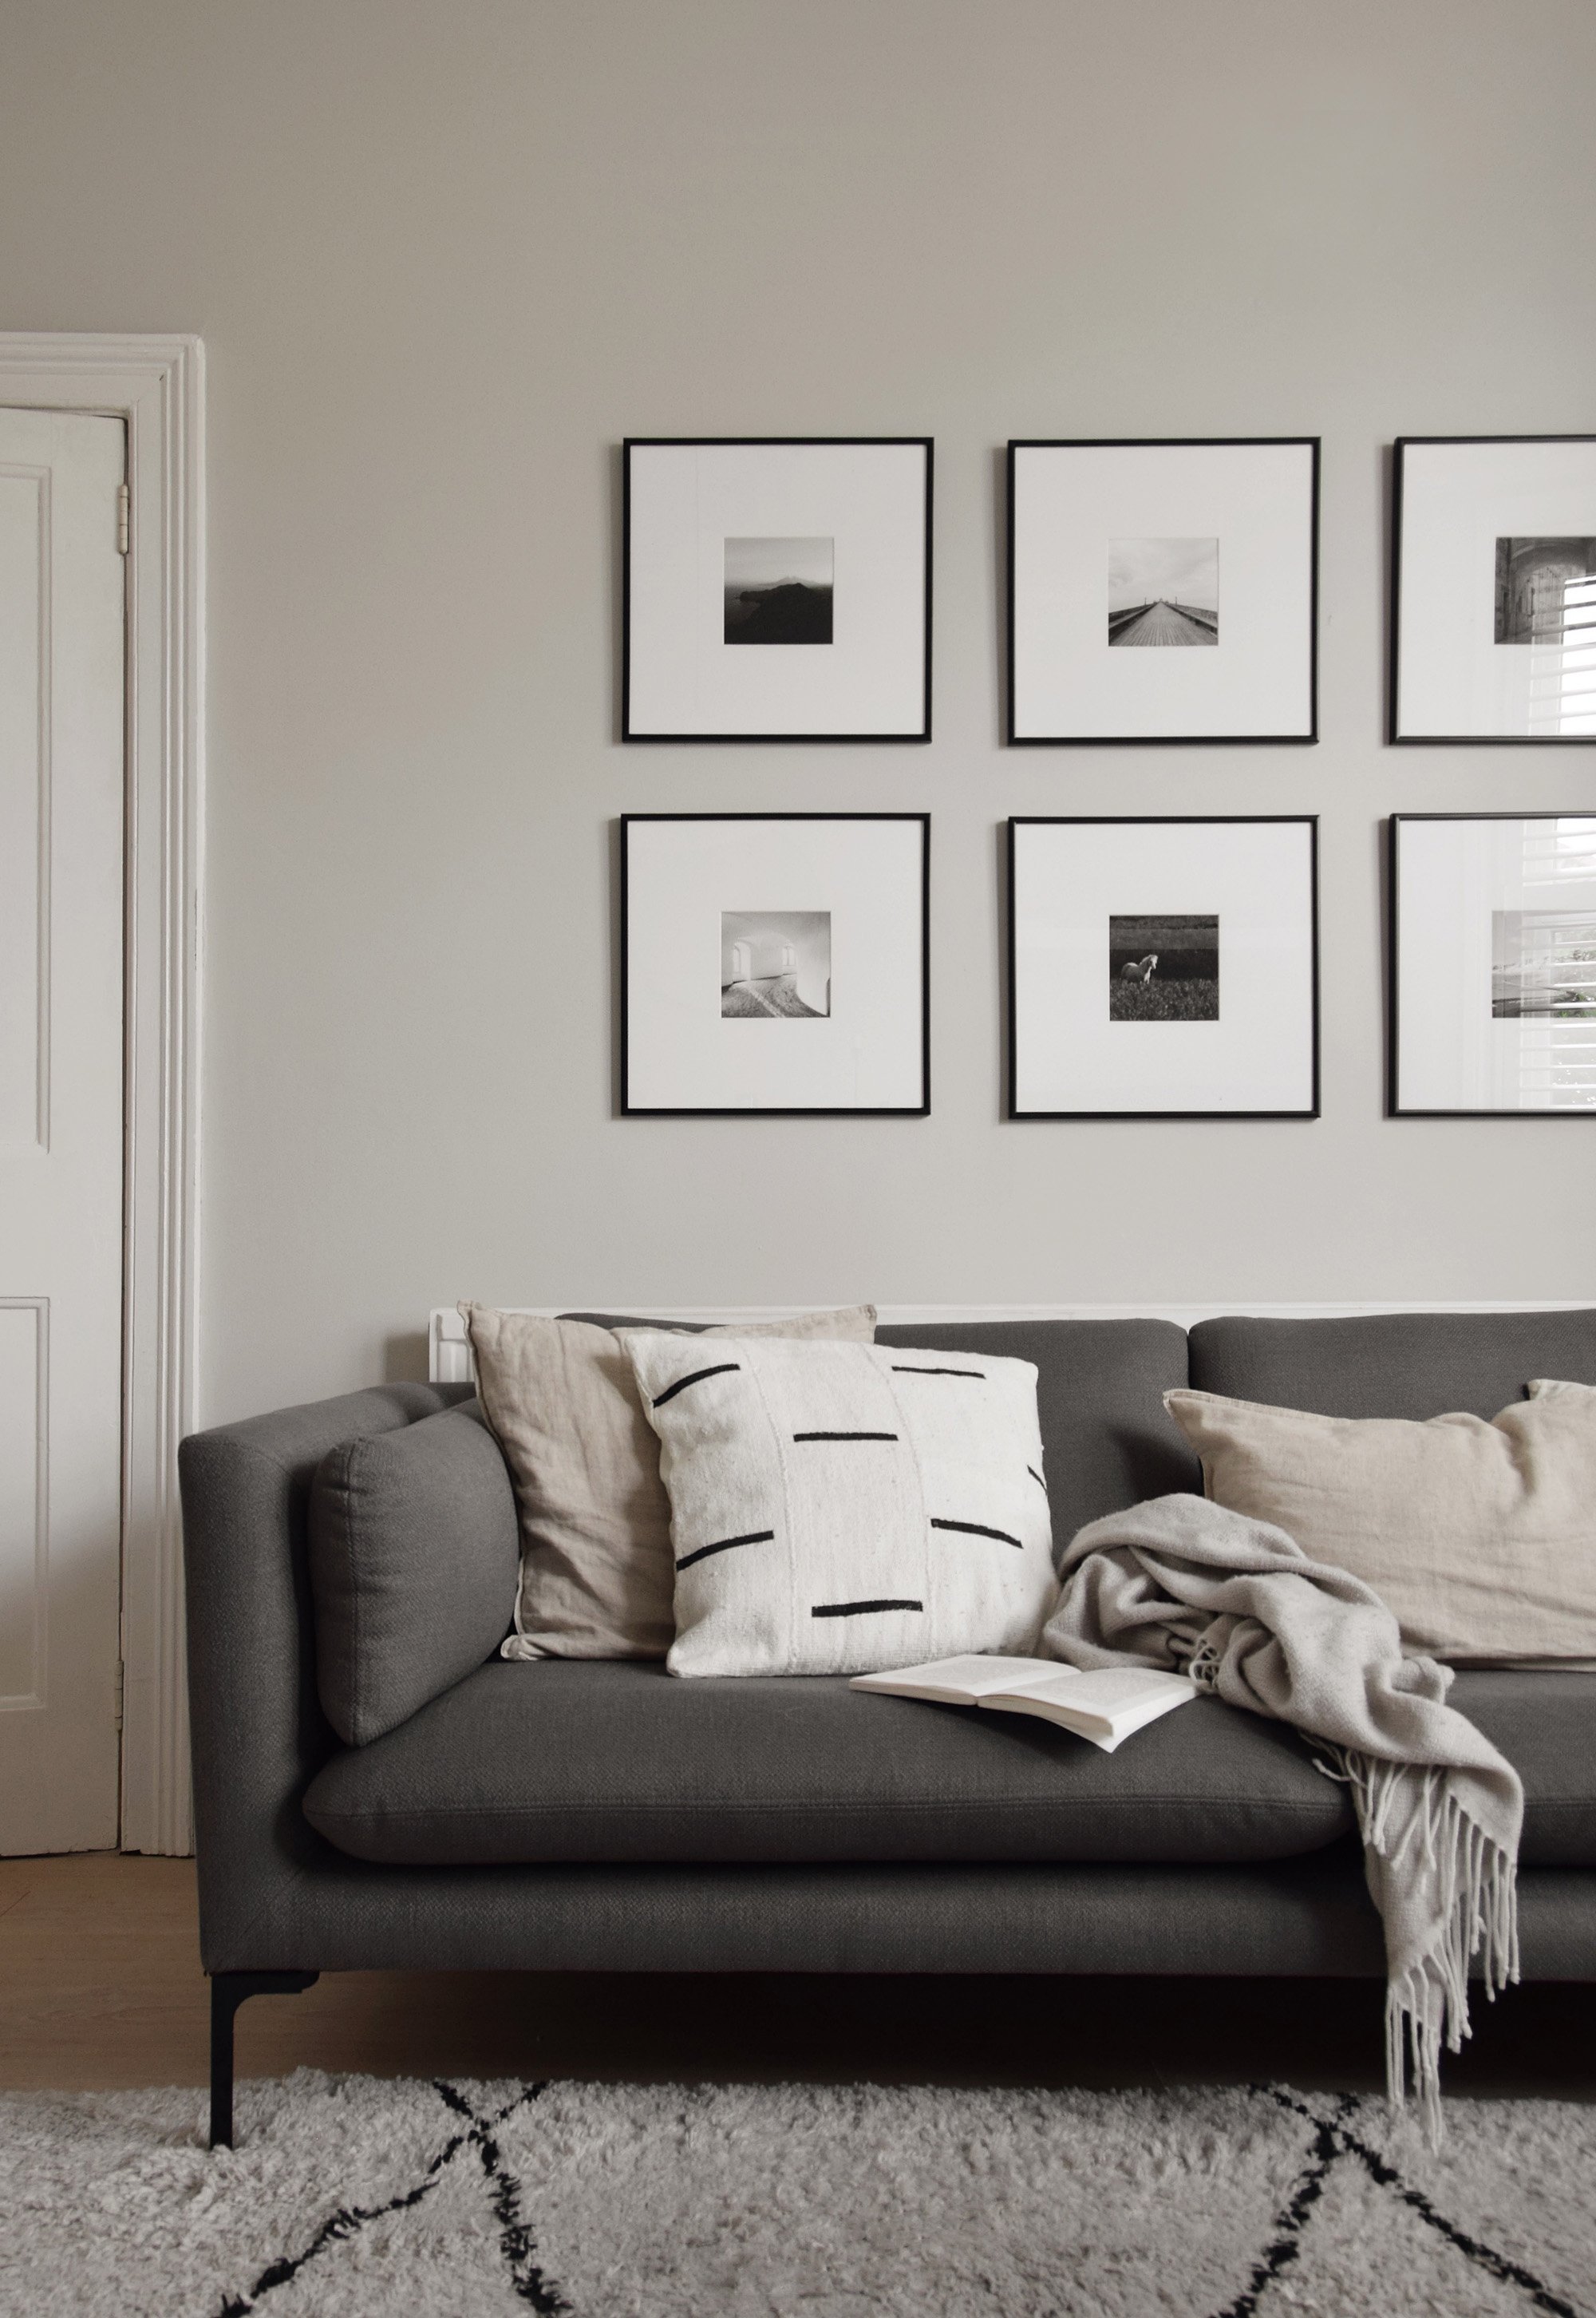 Grey scand-inspired sofa inside the minimalist home of Abi Dare, of These Four Walls Blog